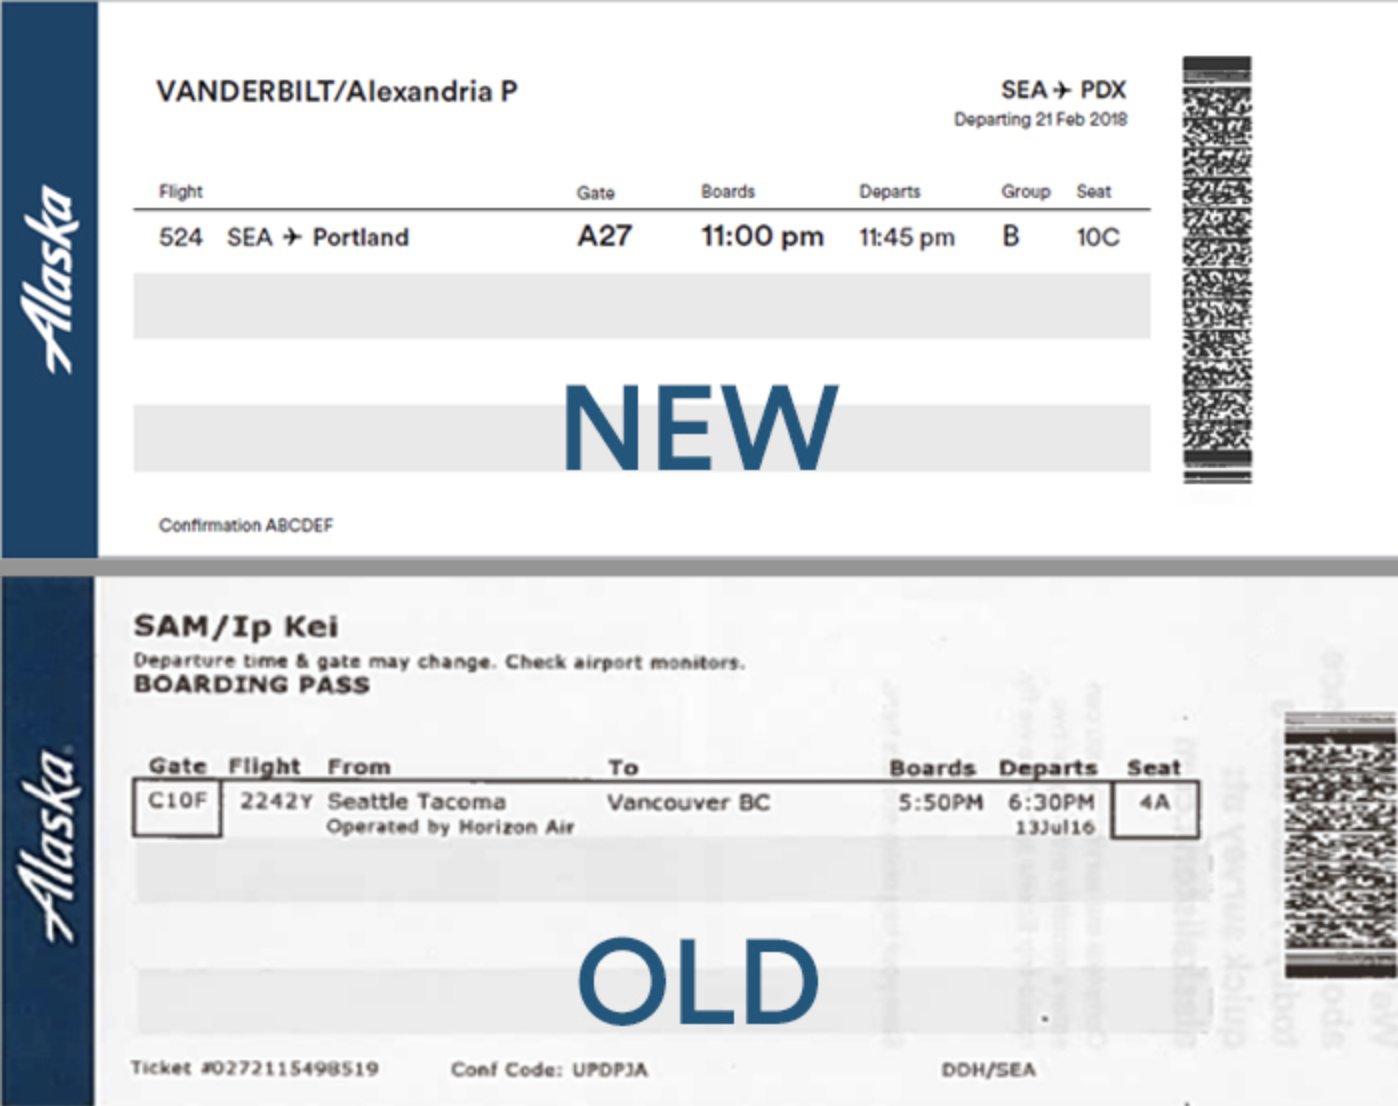 New Alaska boarding pass compared to old